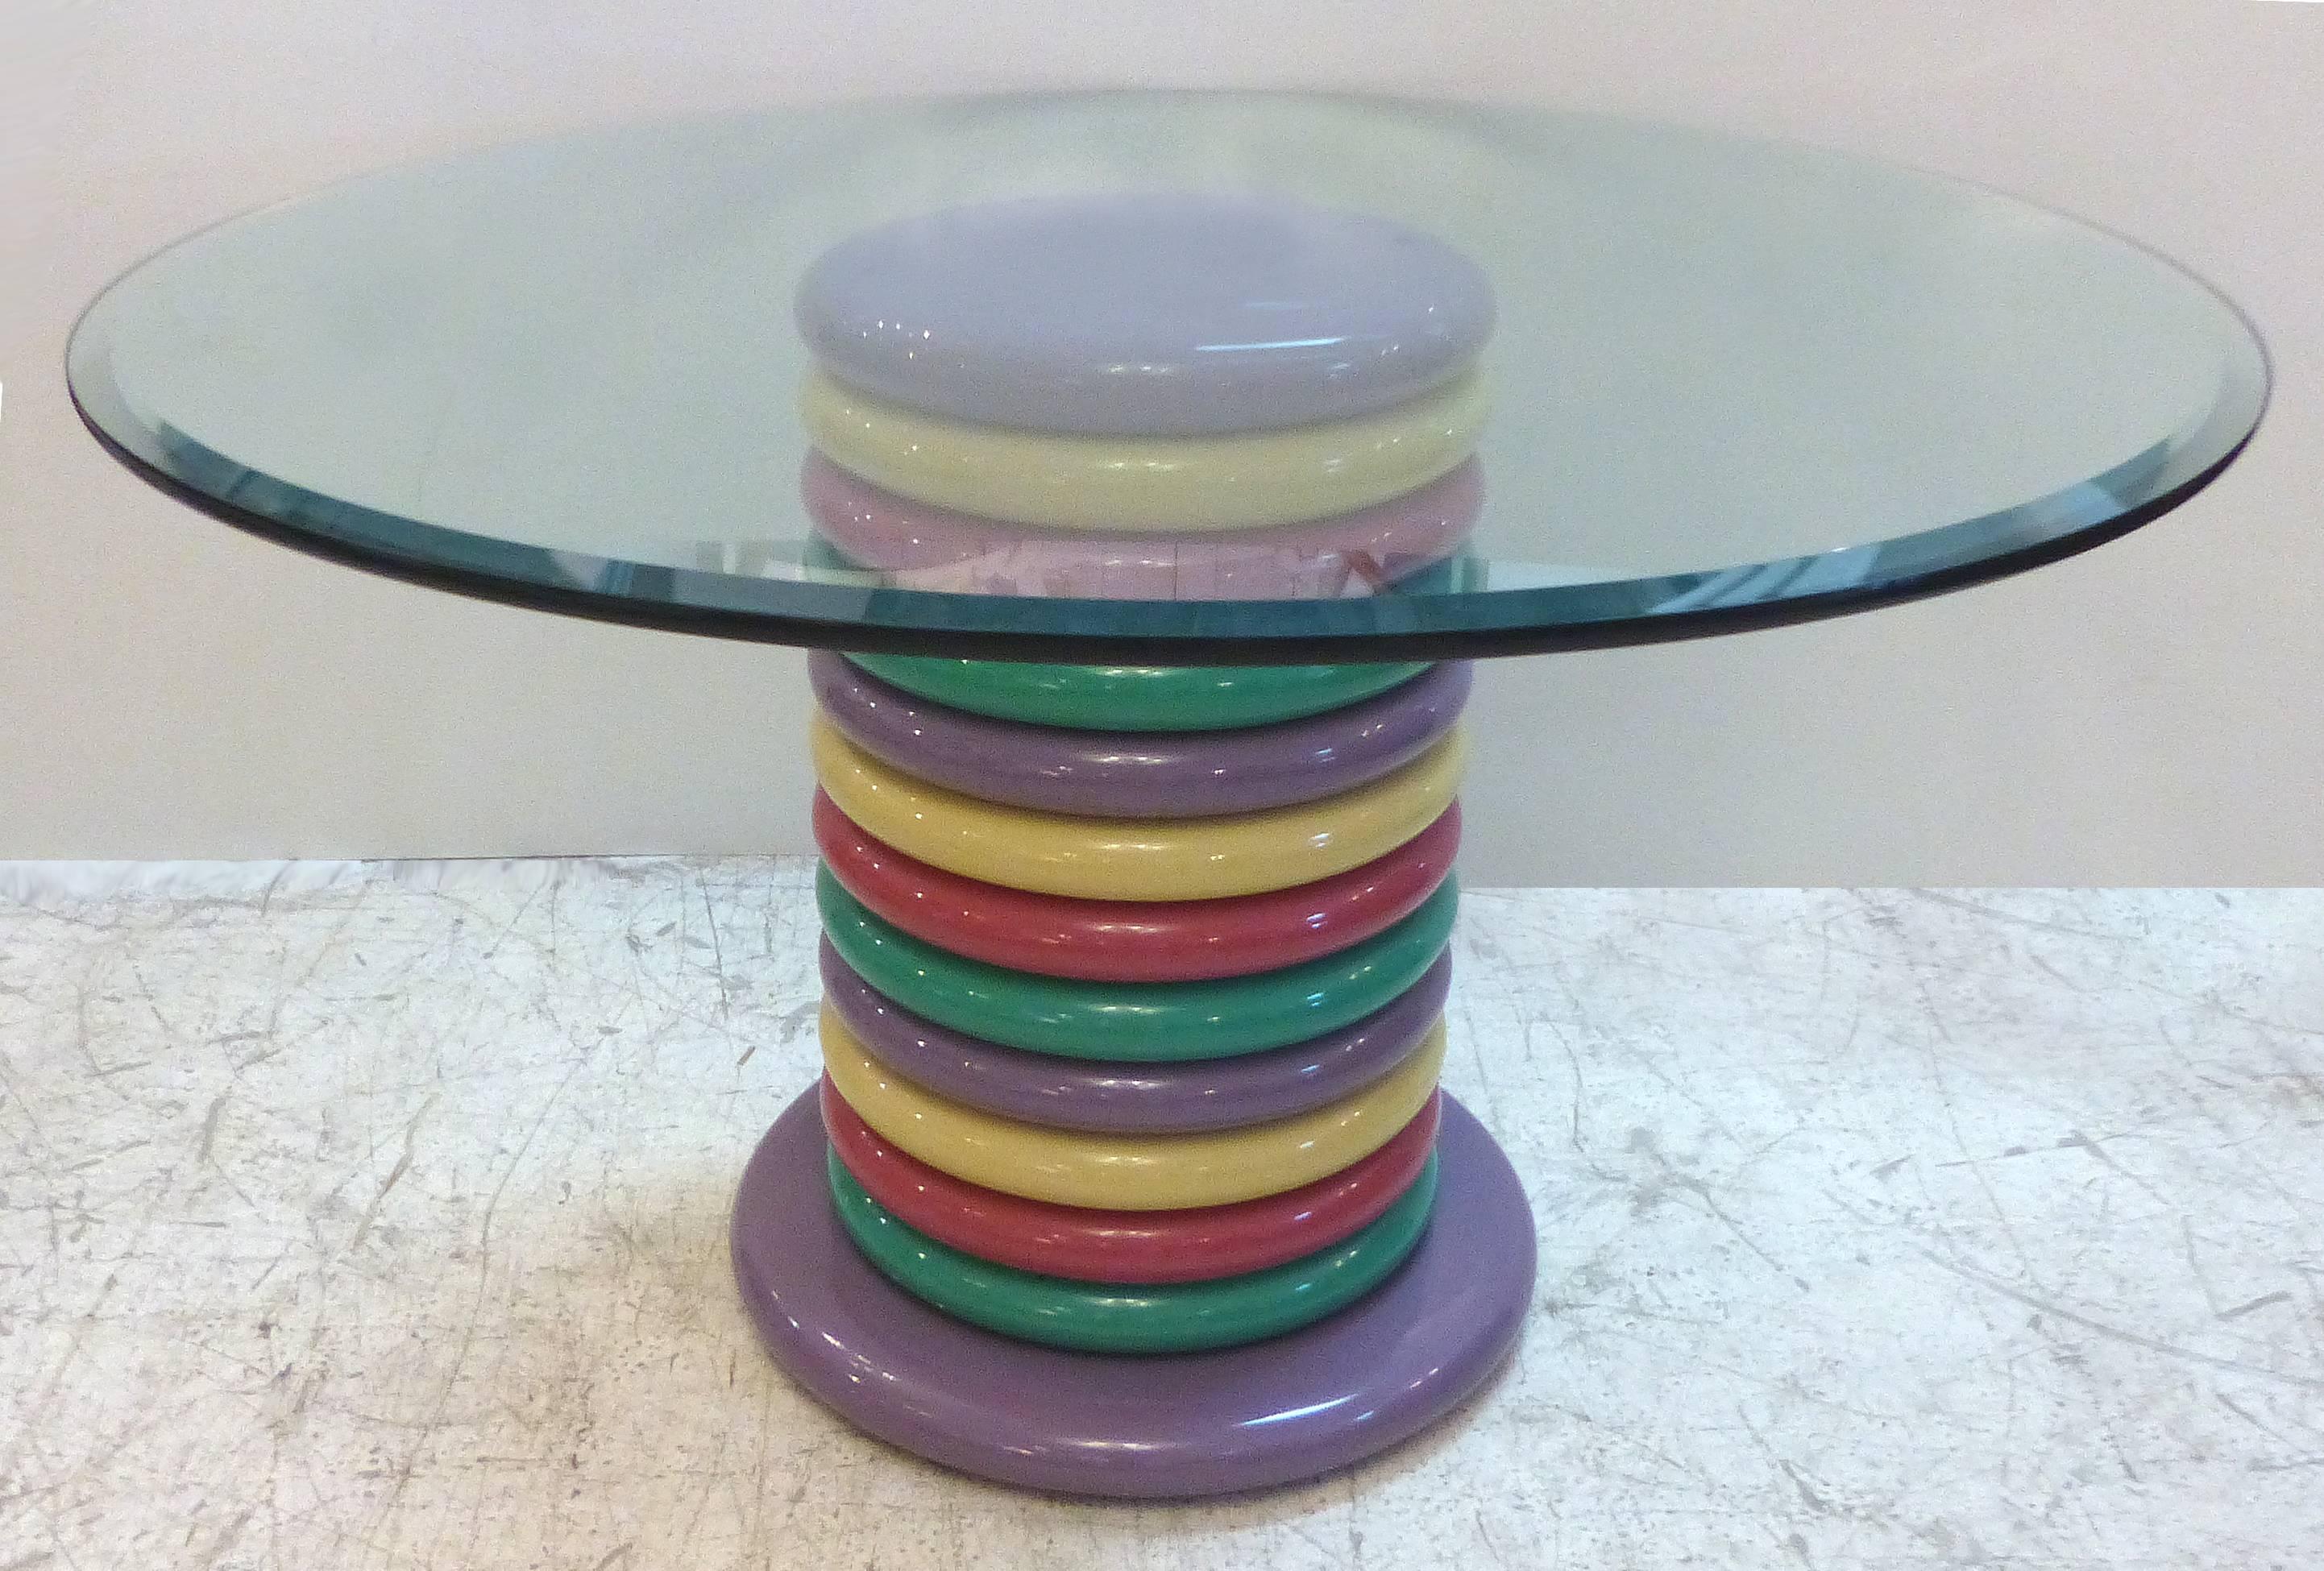 A 1980s Memphis style multicolored table of round circular rings supporting a bevelled edge glass top. The wooden rings are highly lacquered and the glass top has a wide bevel.